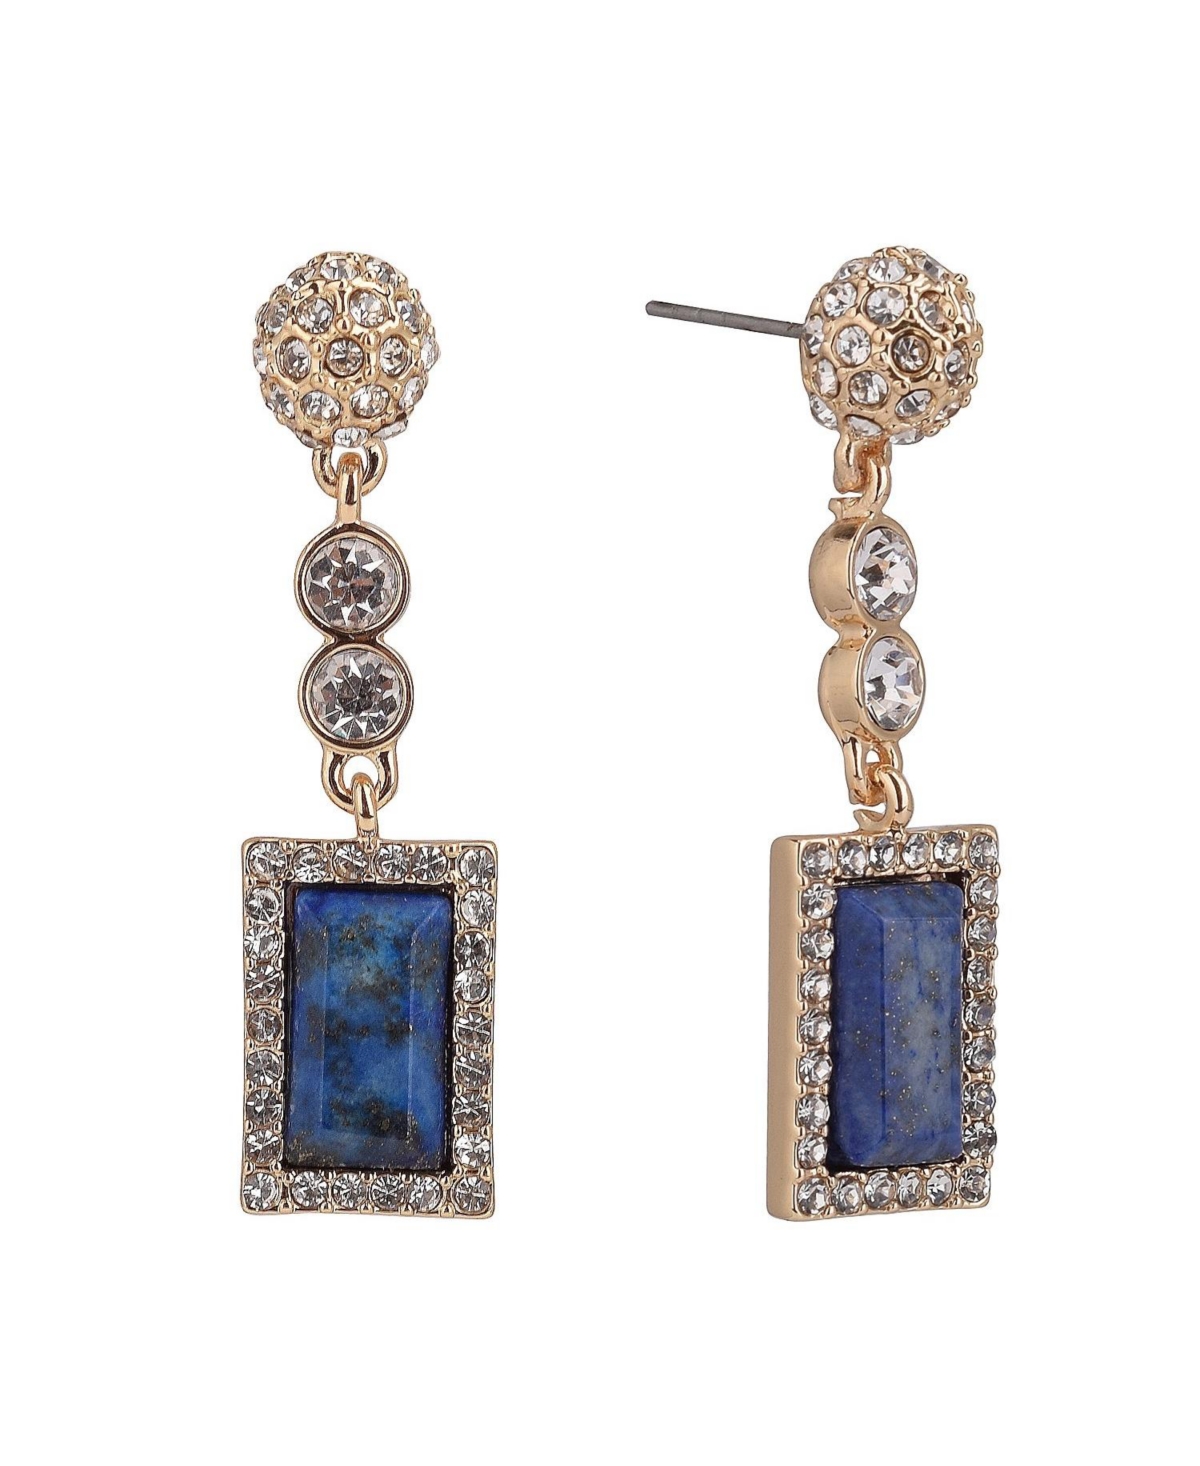 Gold Tone Linear Earrings with Stones and Semi-Precious Stone - Blue